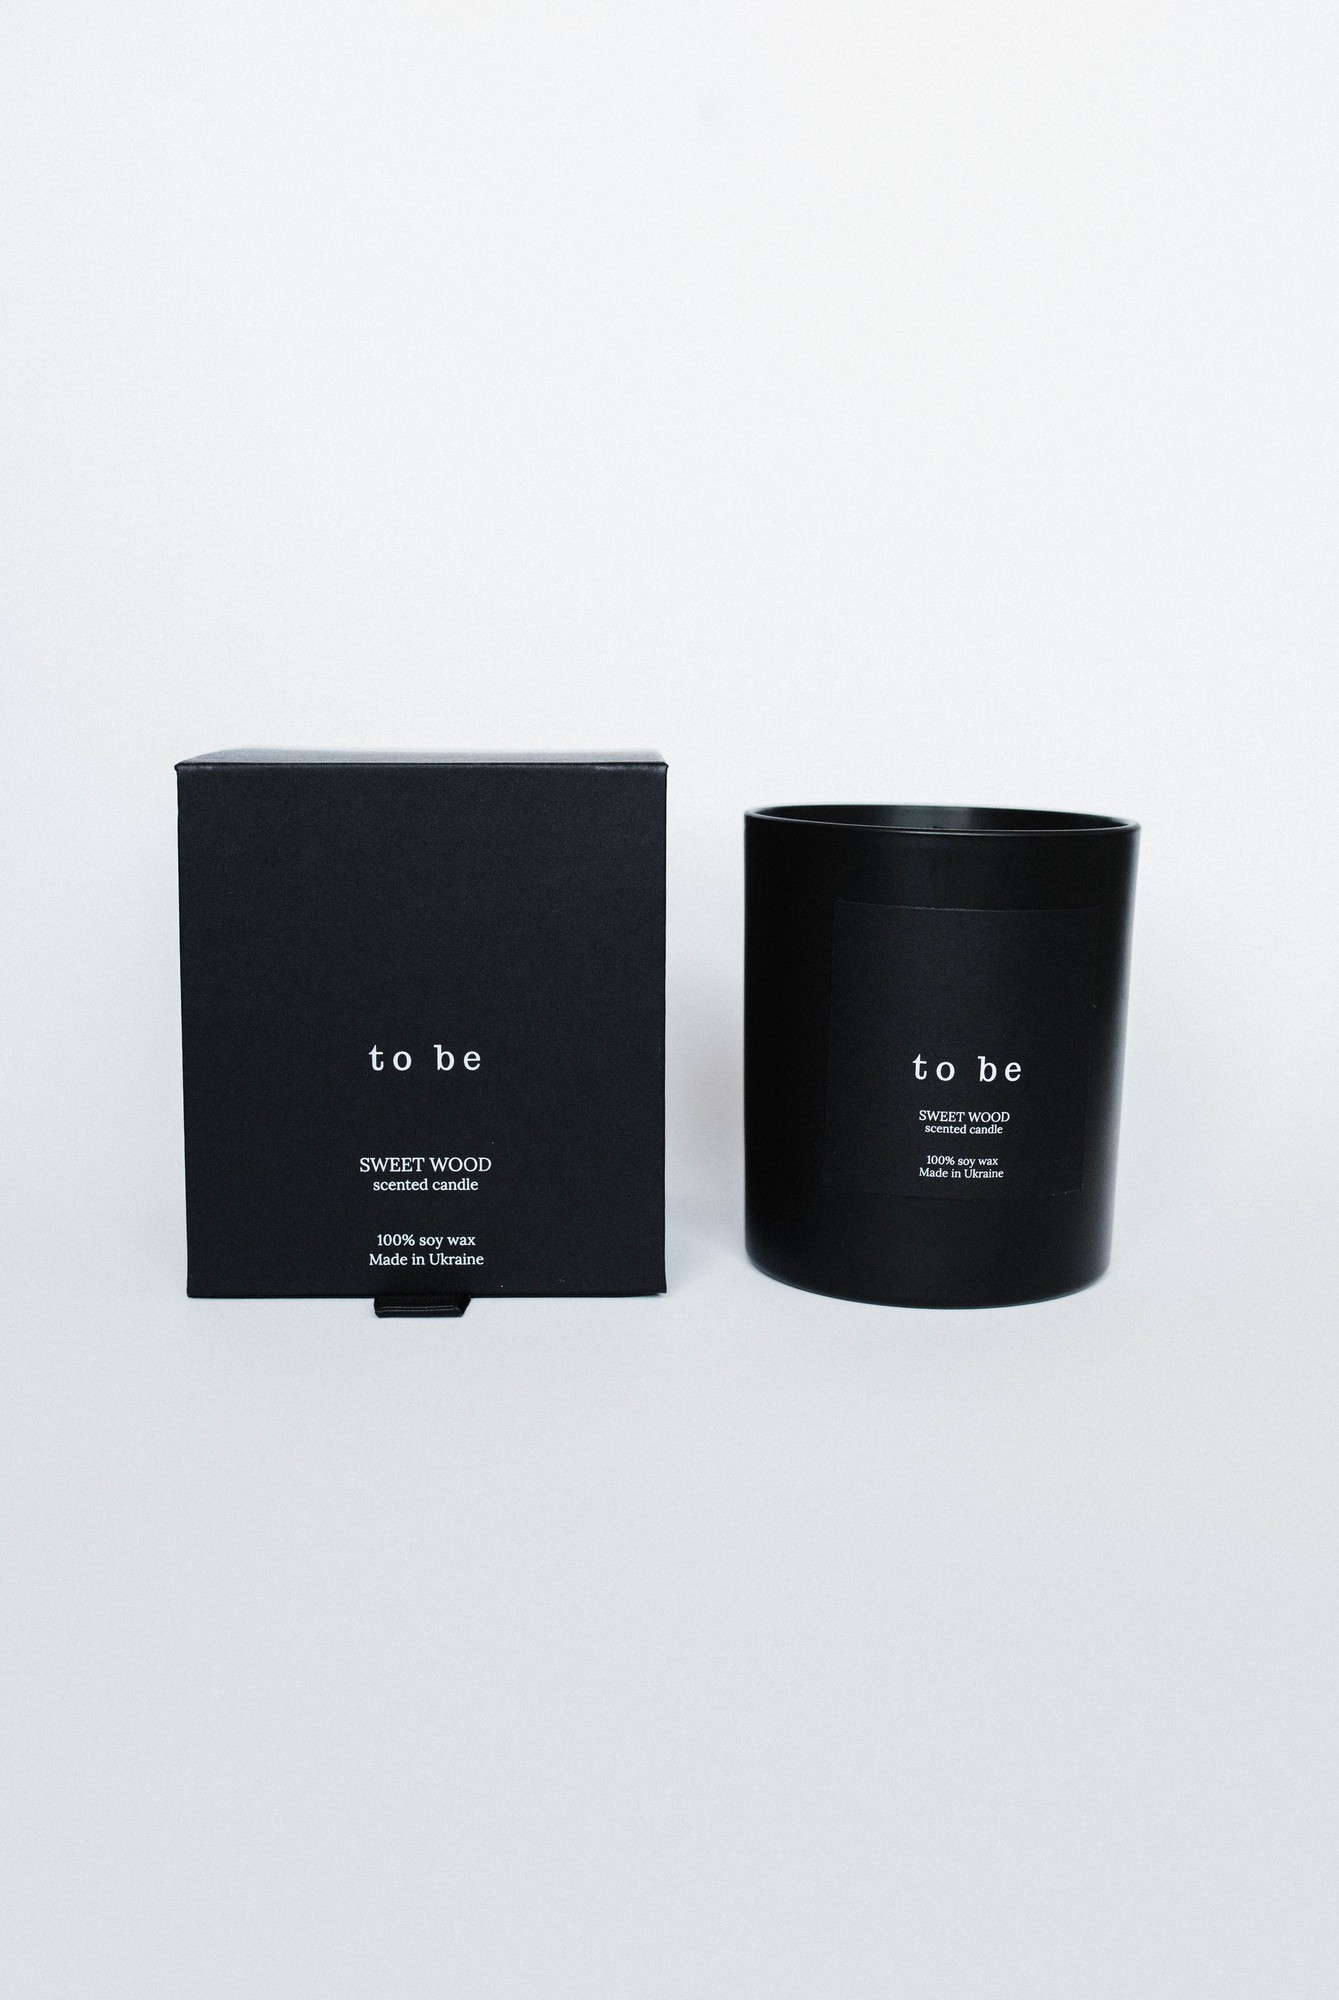 Scented candle "to be", 100% soy wax,  SWEET WOOD